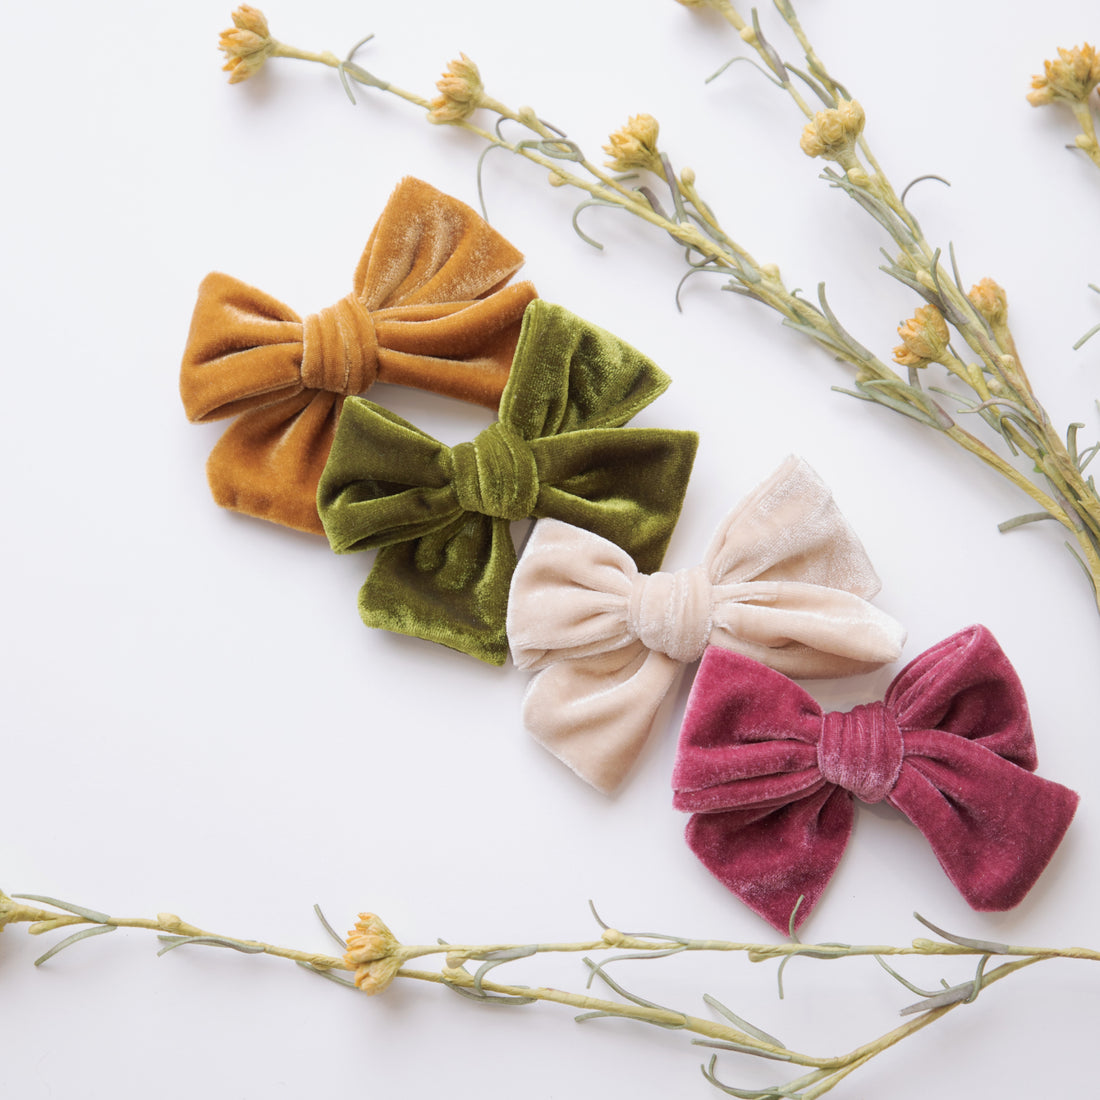 Hand Finished Silk Hair Bows